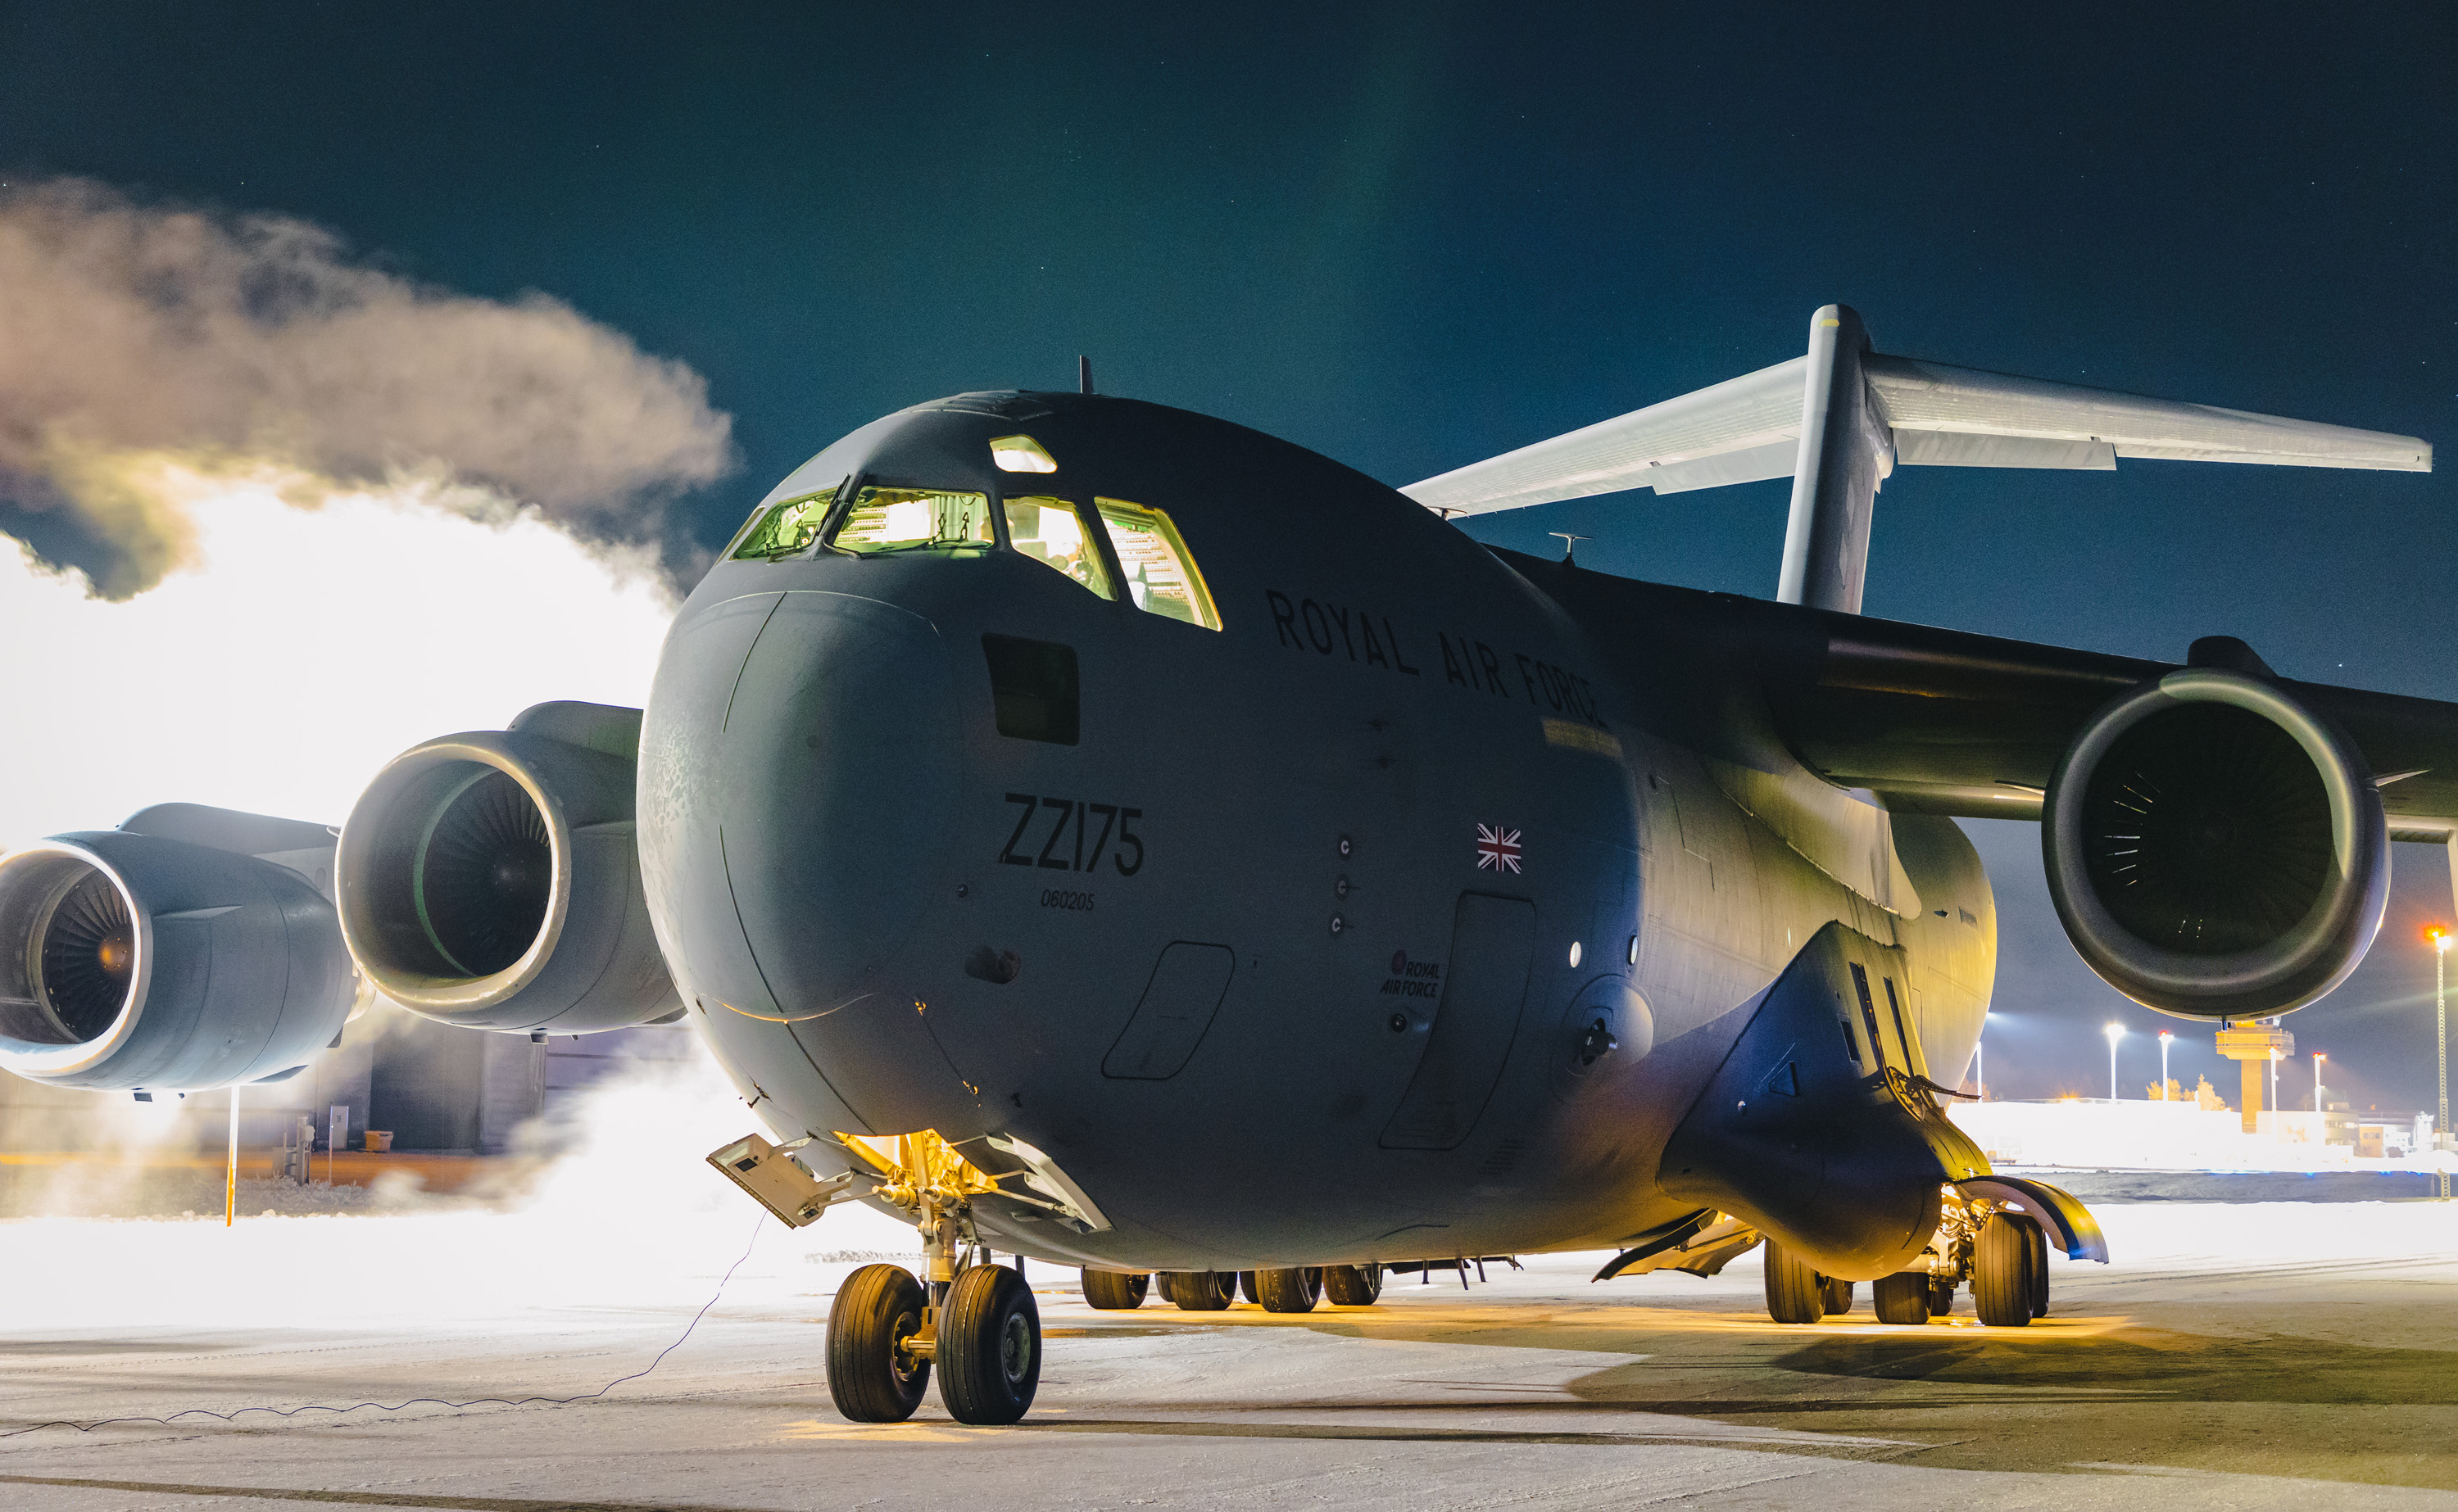 Image shows RAF Globemaster on the airfield at night.